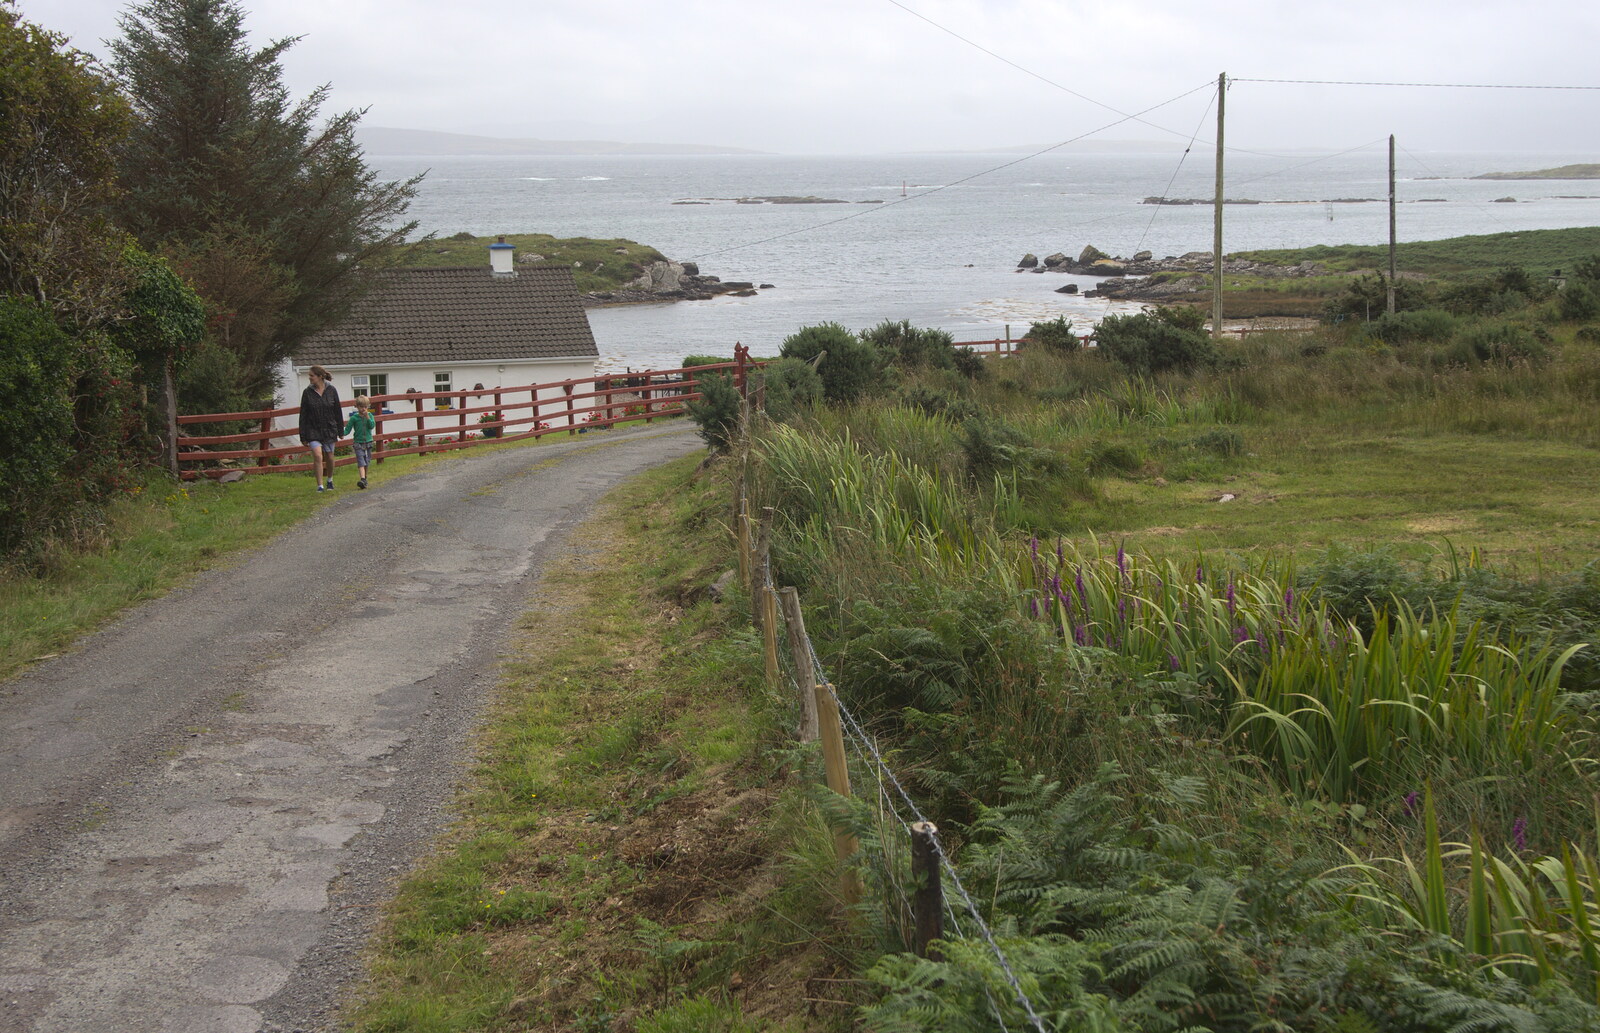 The road down to the sea from Staigue Fort and the Beach, Kerry, Ireland - 2nd August 2017